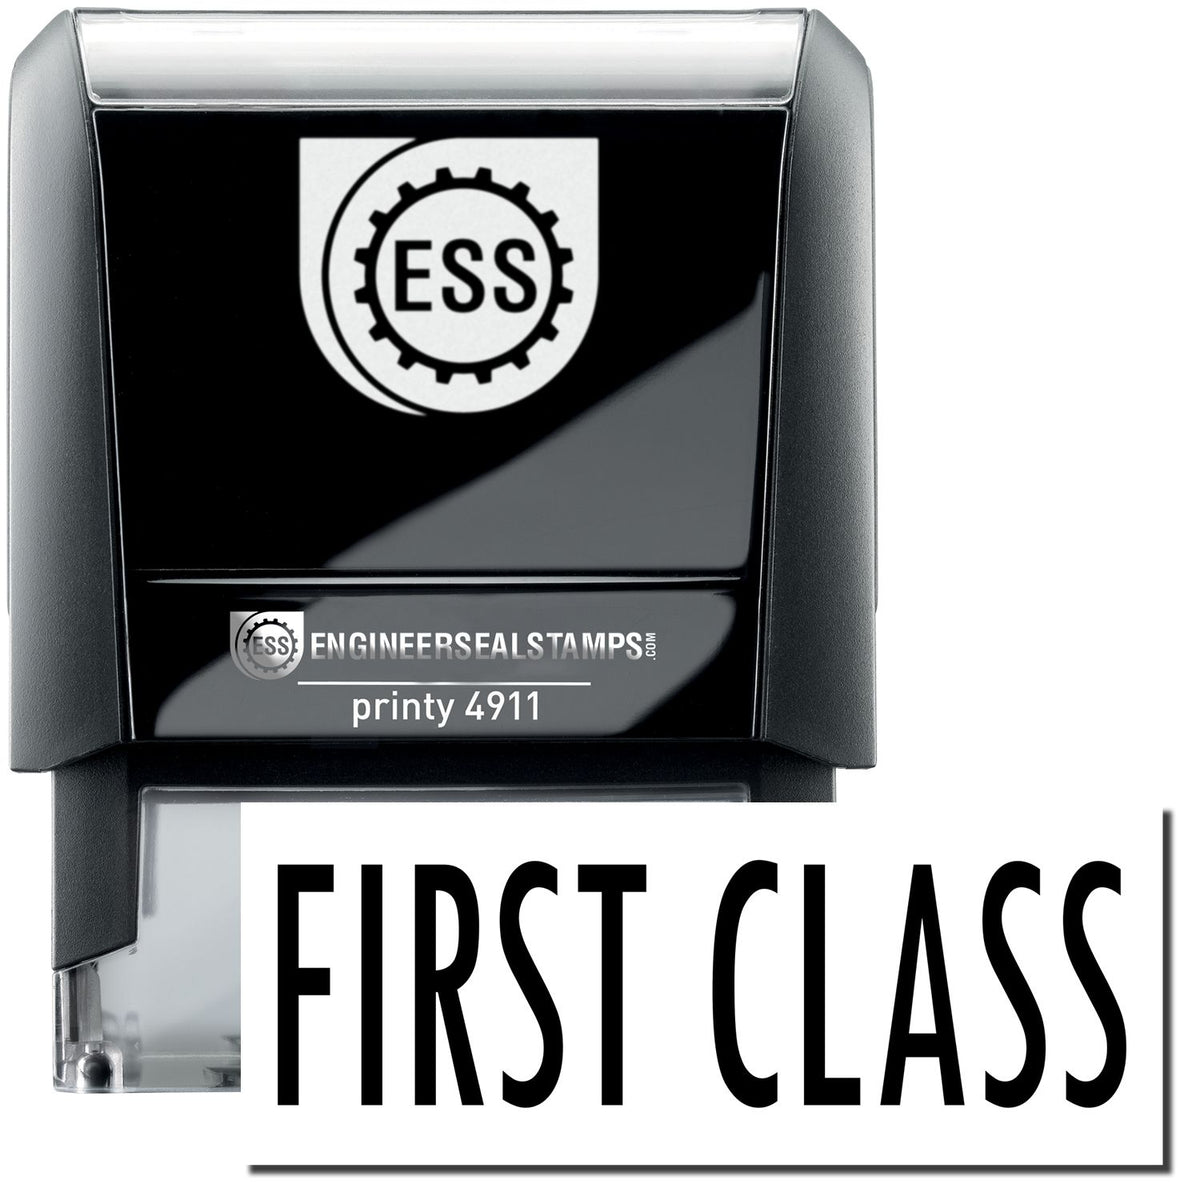 A self-inking stamp with a stamped image showing how the text &quot;FIRST CLASS&quot; is displayed after stamping.